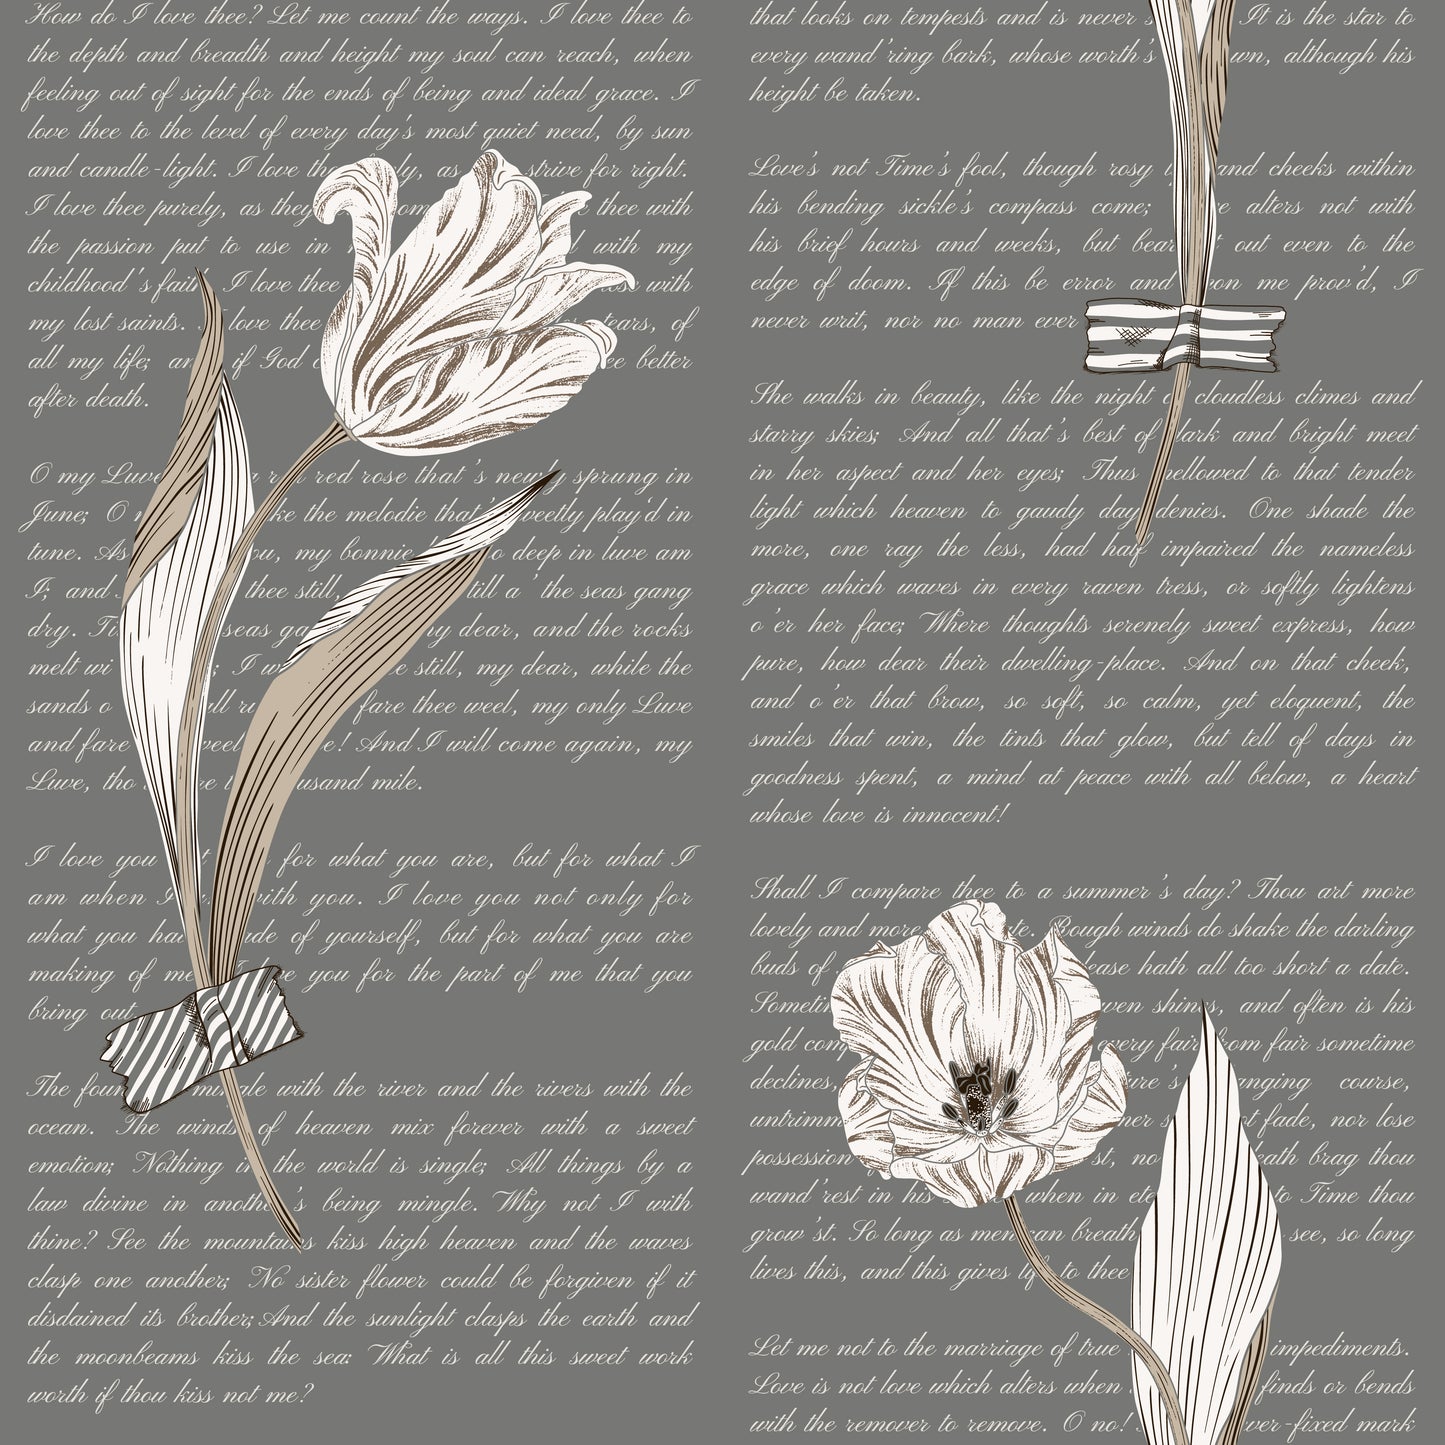 Whimsical cream tulip design on script print dark grey/gray background easy to install and remove peel and stick custom wallpaper available in different lengths/sizes locally created and printed in Canada wallpaper. Washable, durable, commercial grade, removable and waterproof.